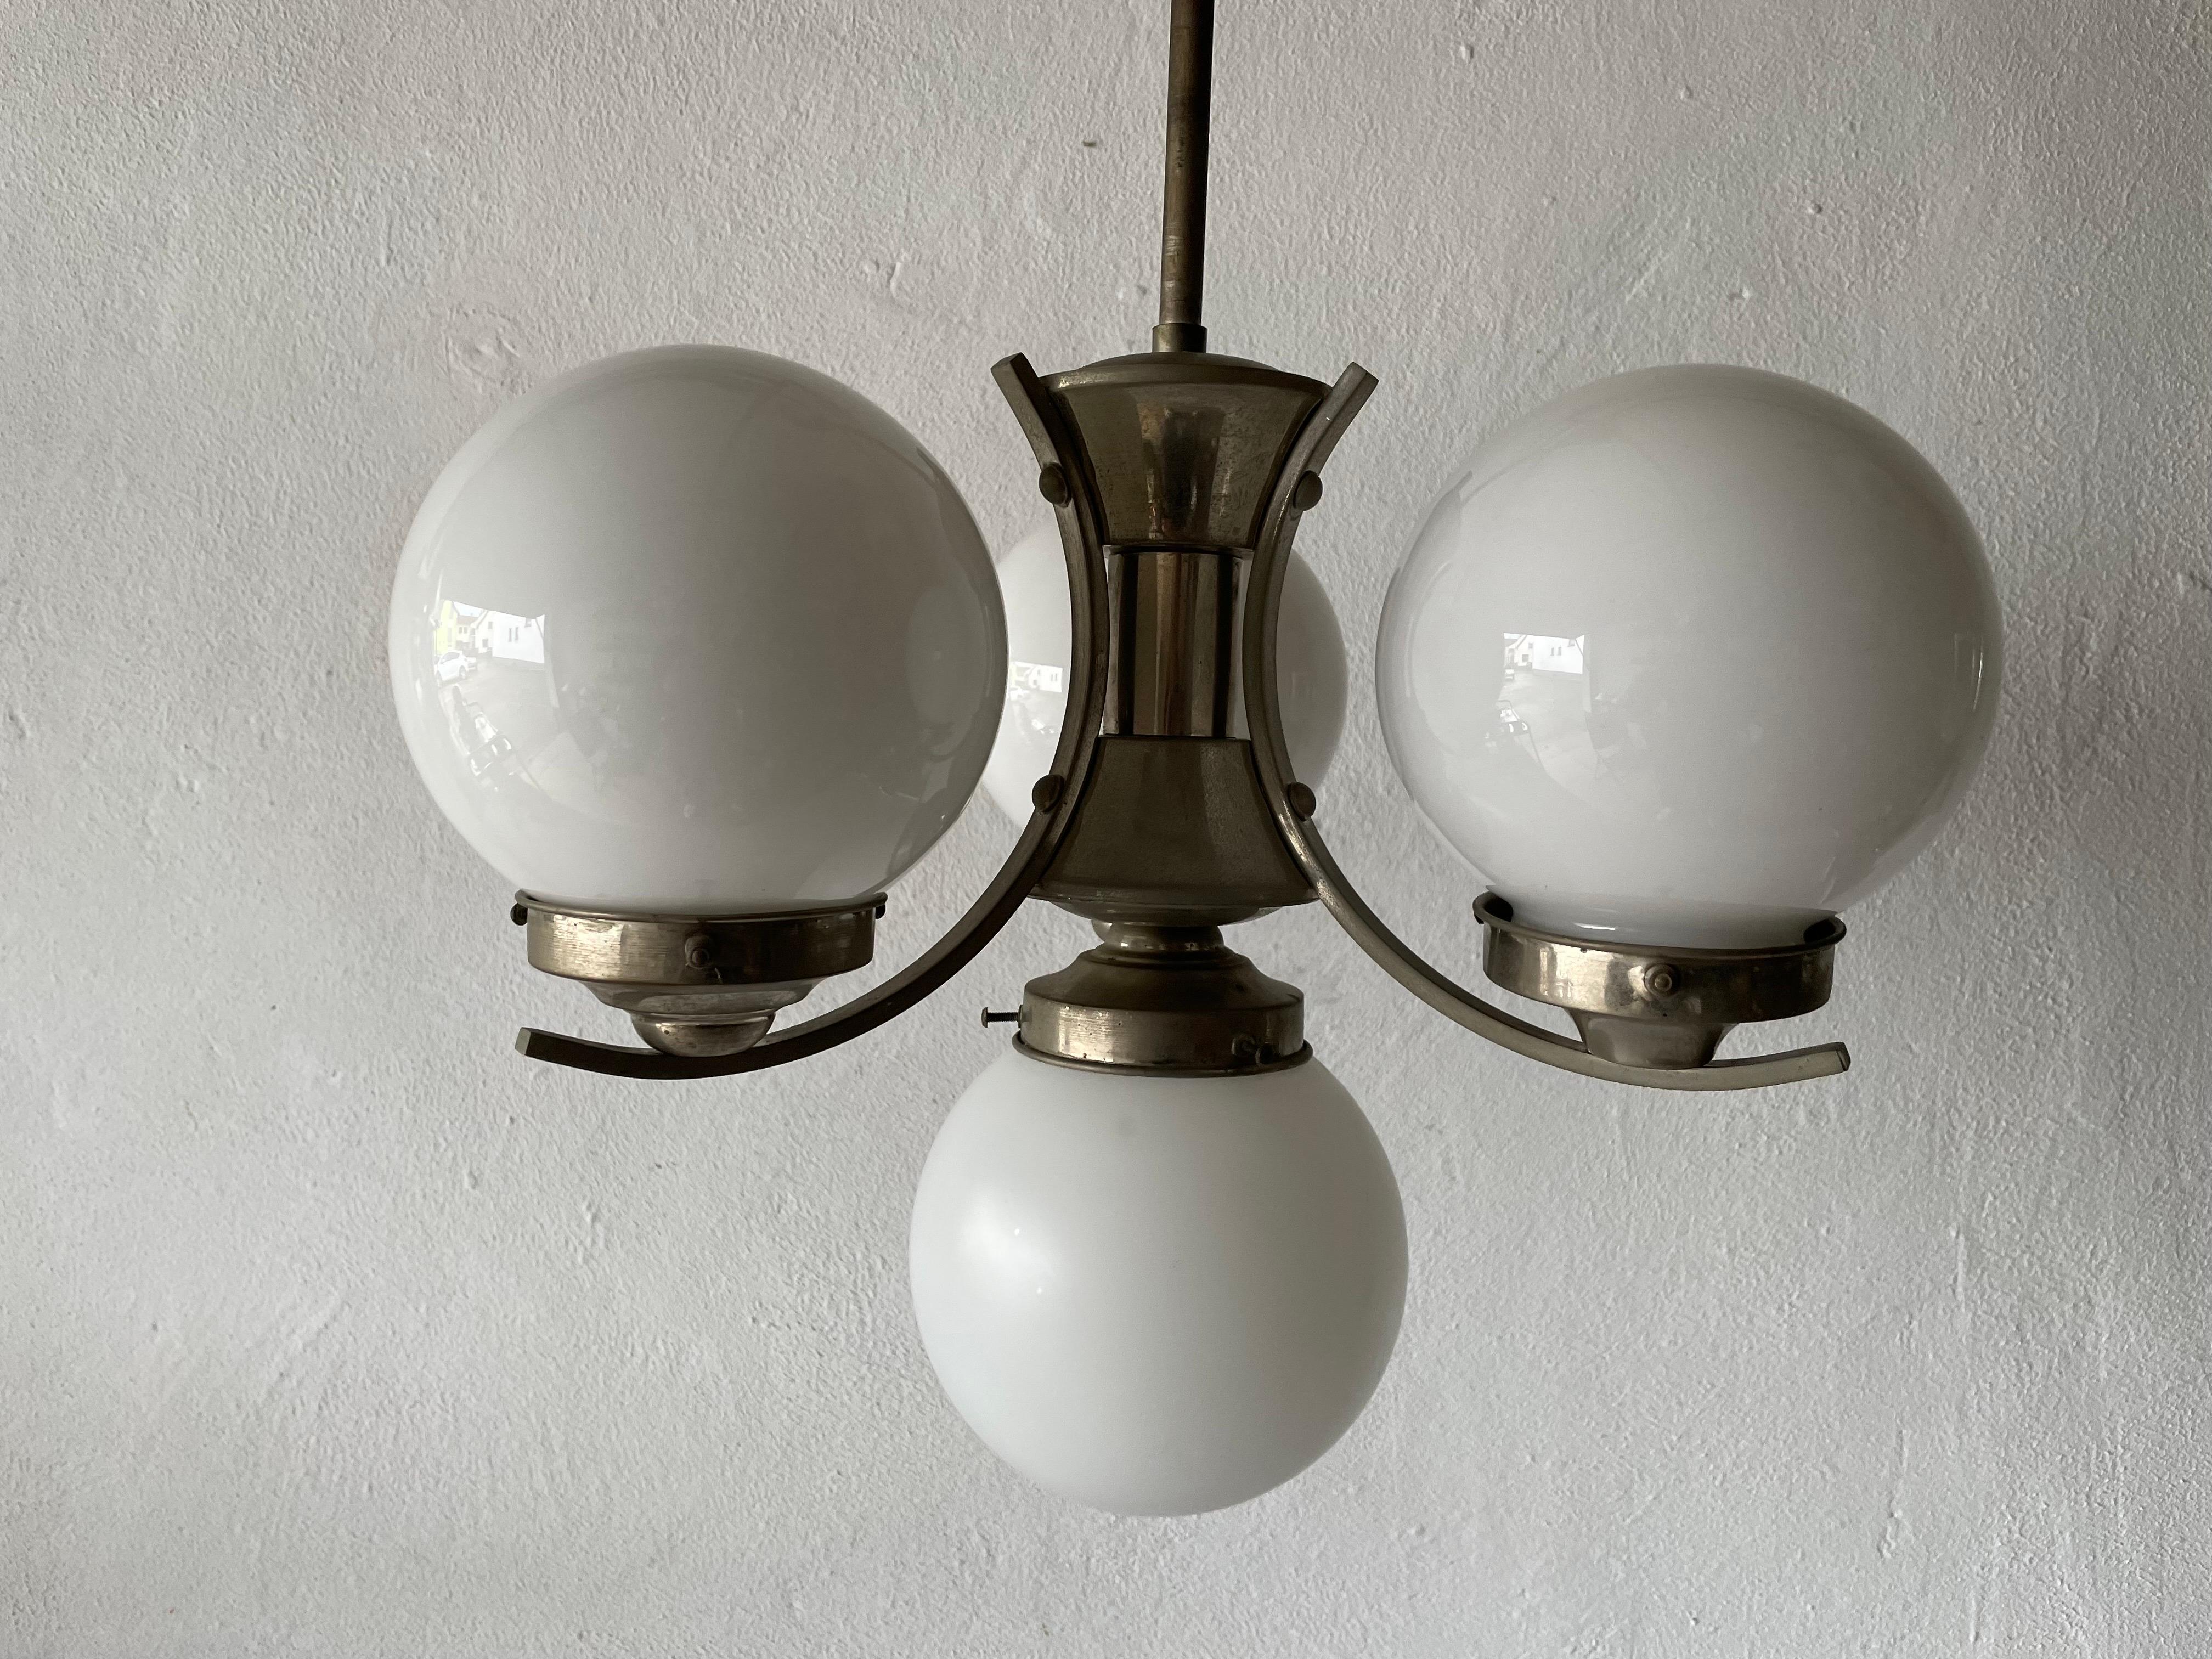 Art Deco Metallic Silver 4 Balls Ceiling Lamp, 1940s, Germany For Sale 3